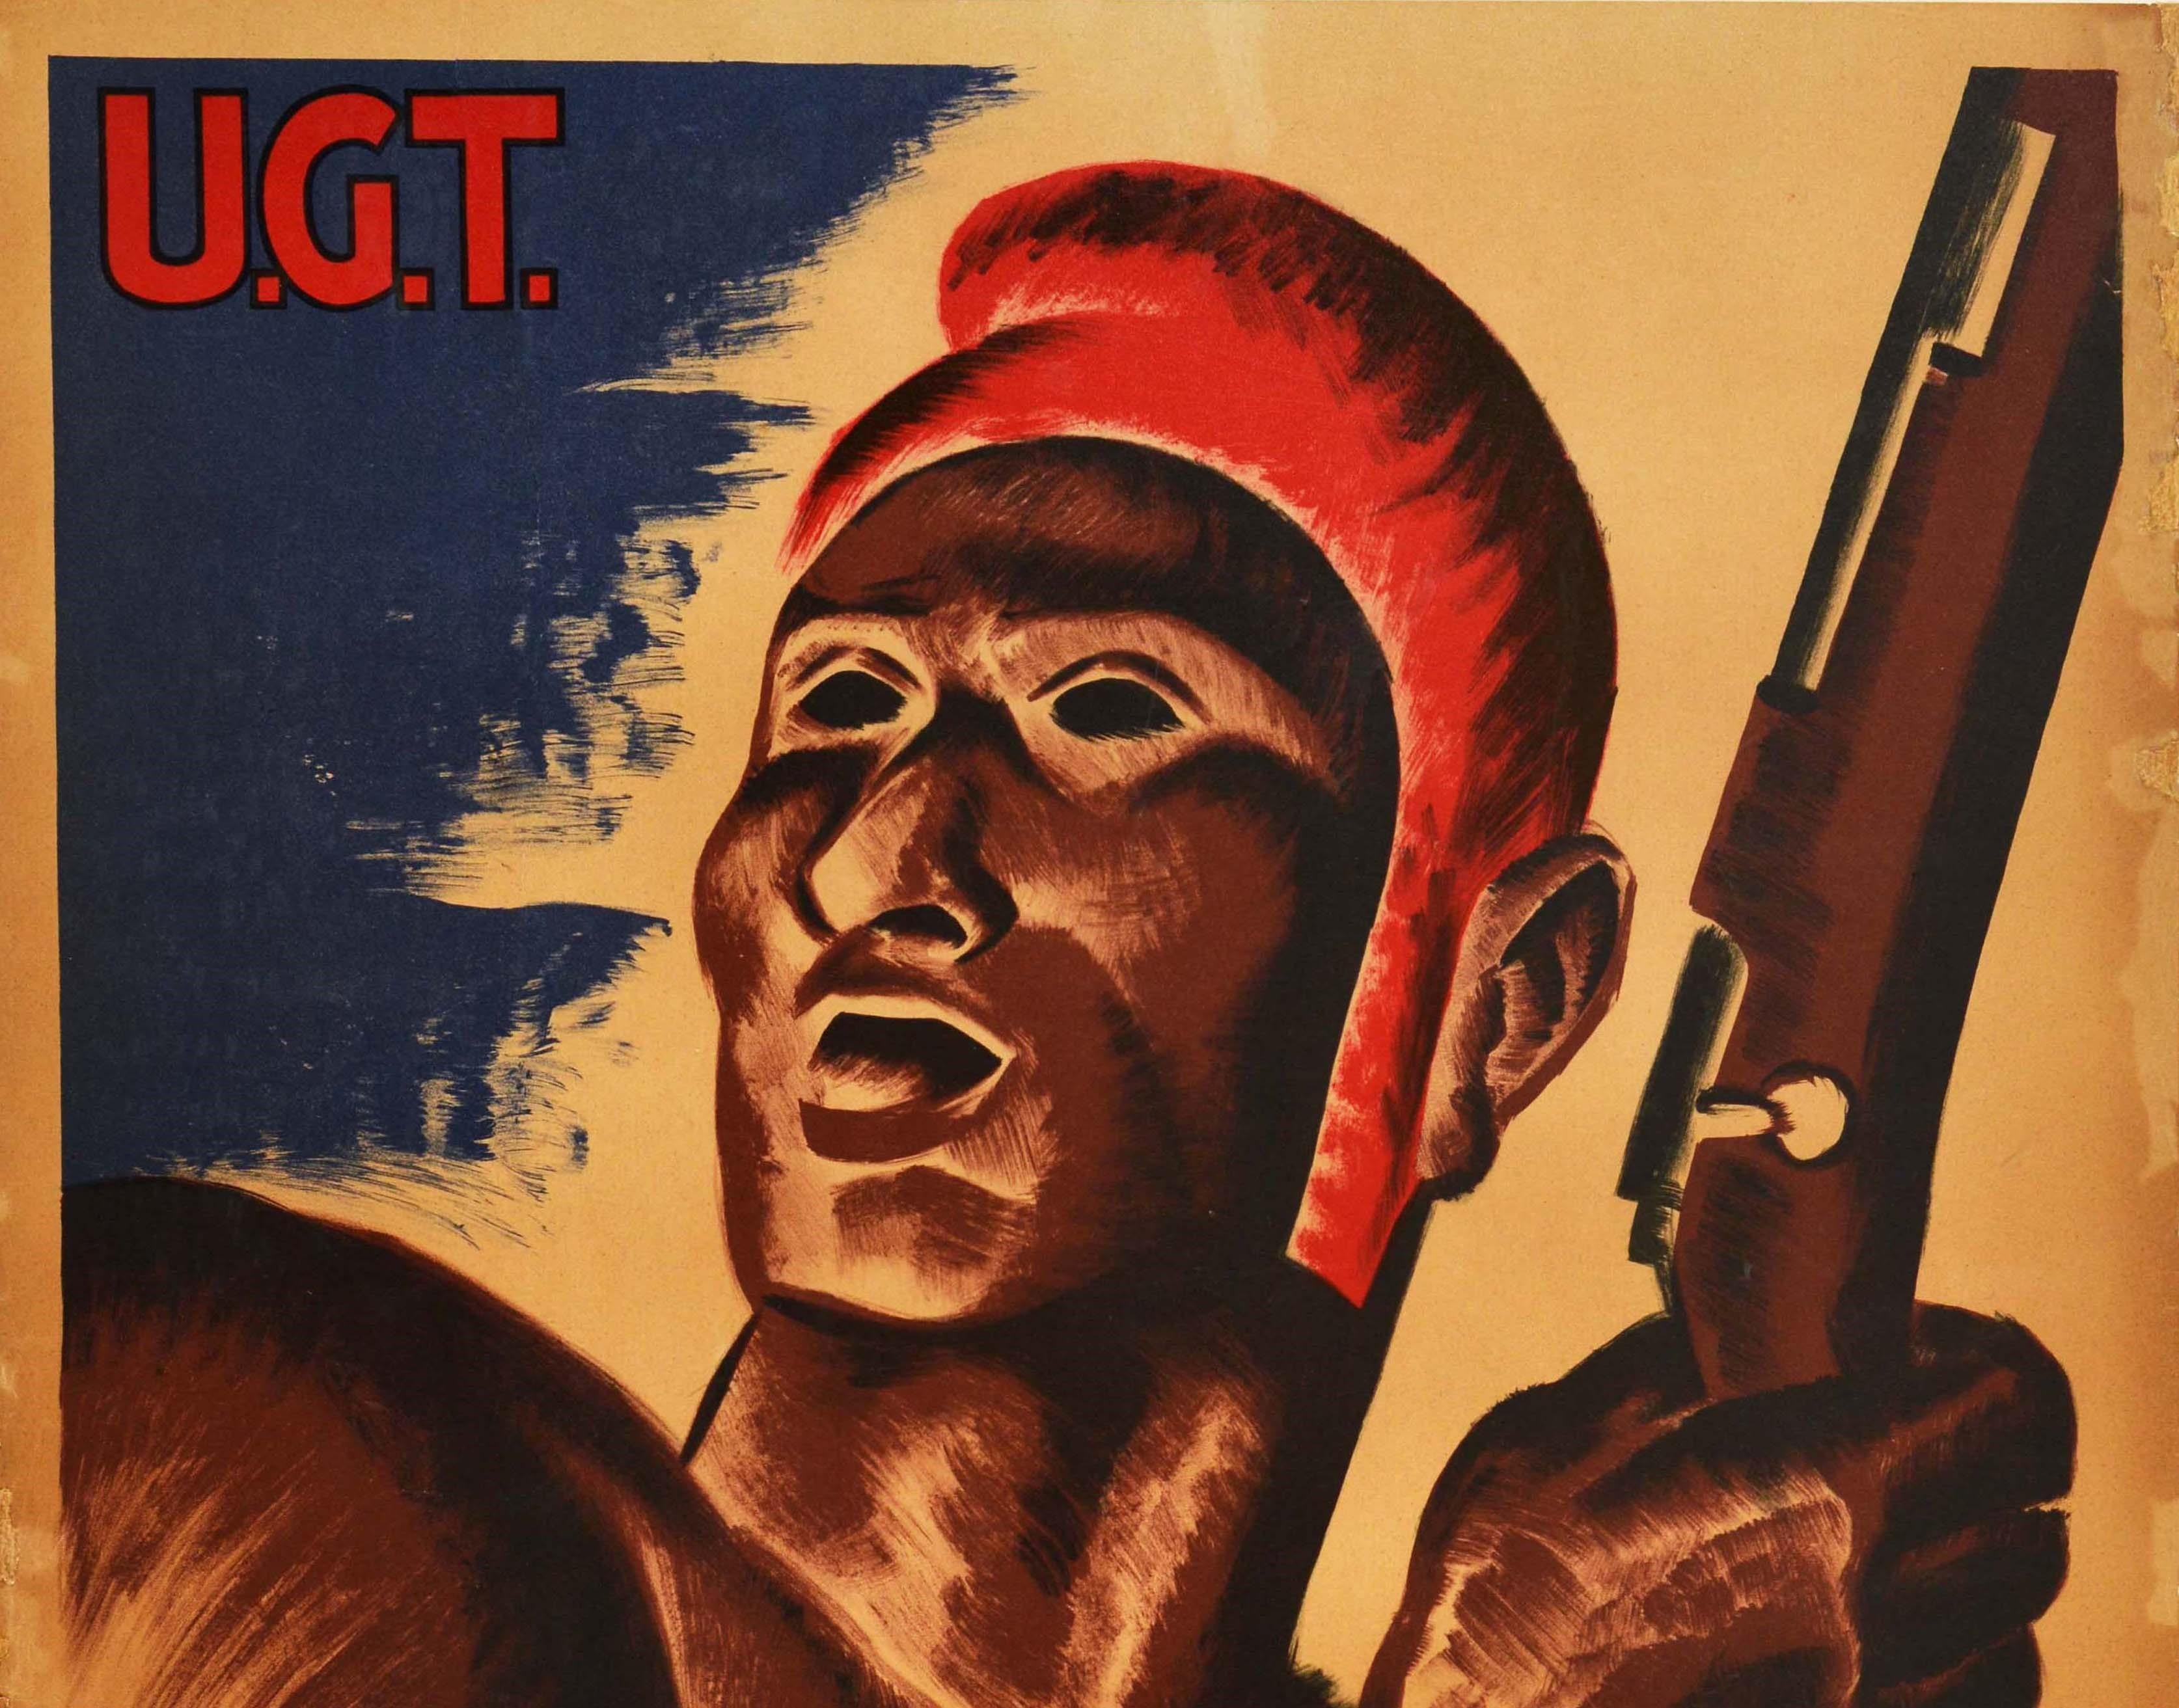 Original vintage Spanish Civil War poster - Workers! All Against Fascism / Treballadors! Tots contra el feixisme - featuring a dynamic warrior figure armed with a rifle gun above the bold text with the Union of Professional Designers / Sindicat de